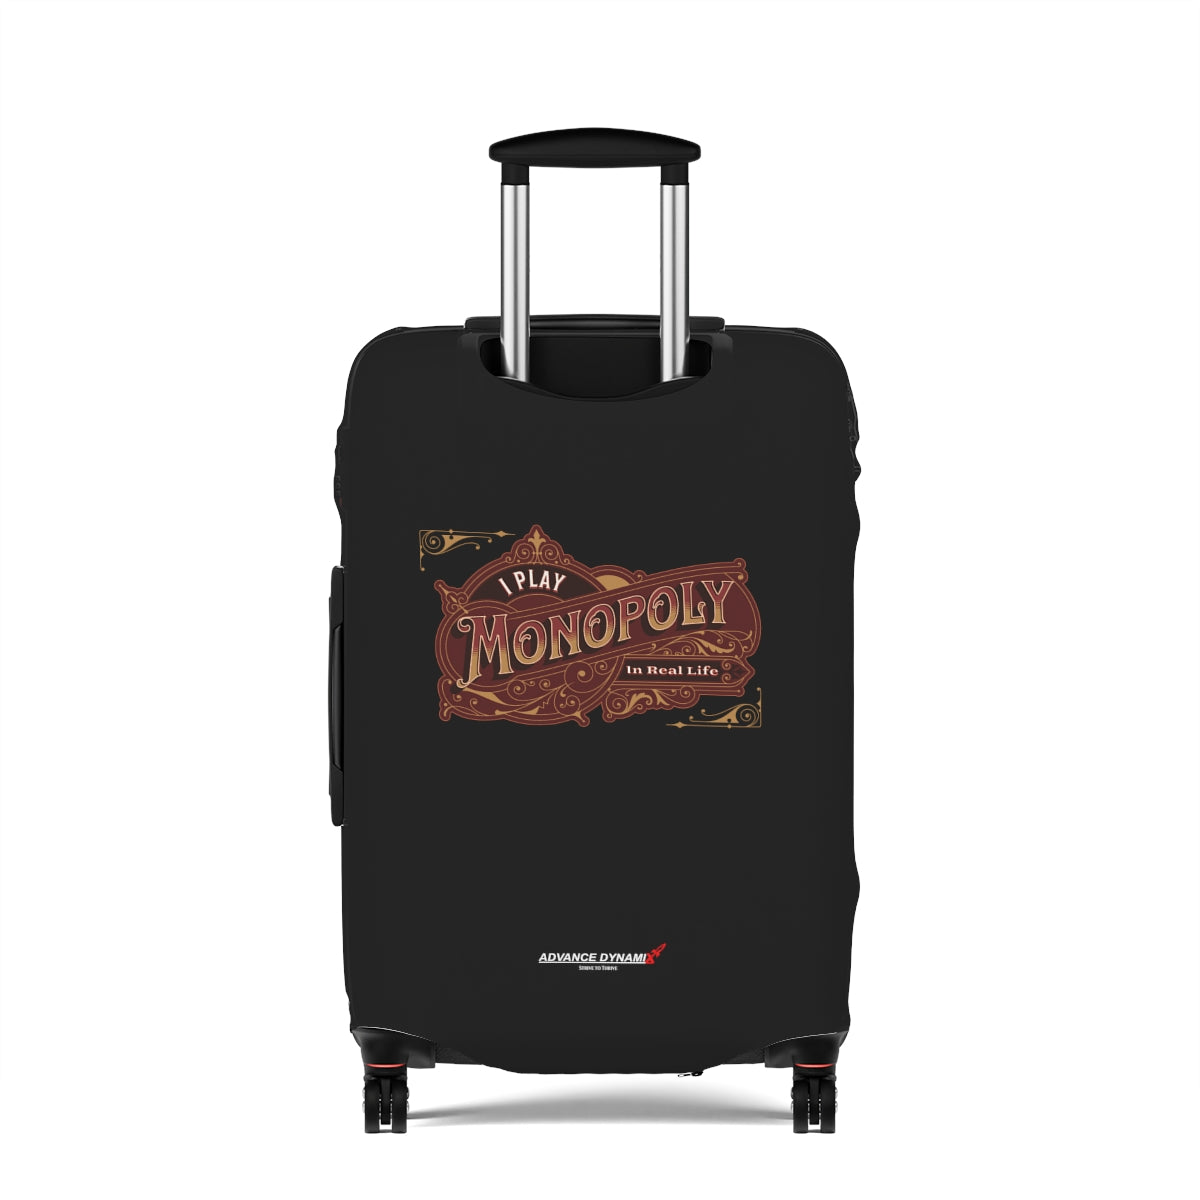 I play Monopoly in real life - Luggage Covers Infused with Advance Dynamix Add-A-Tude - Tell the world!